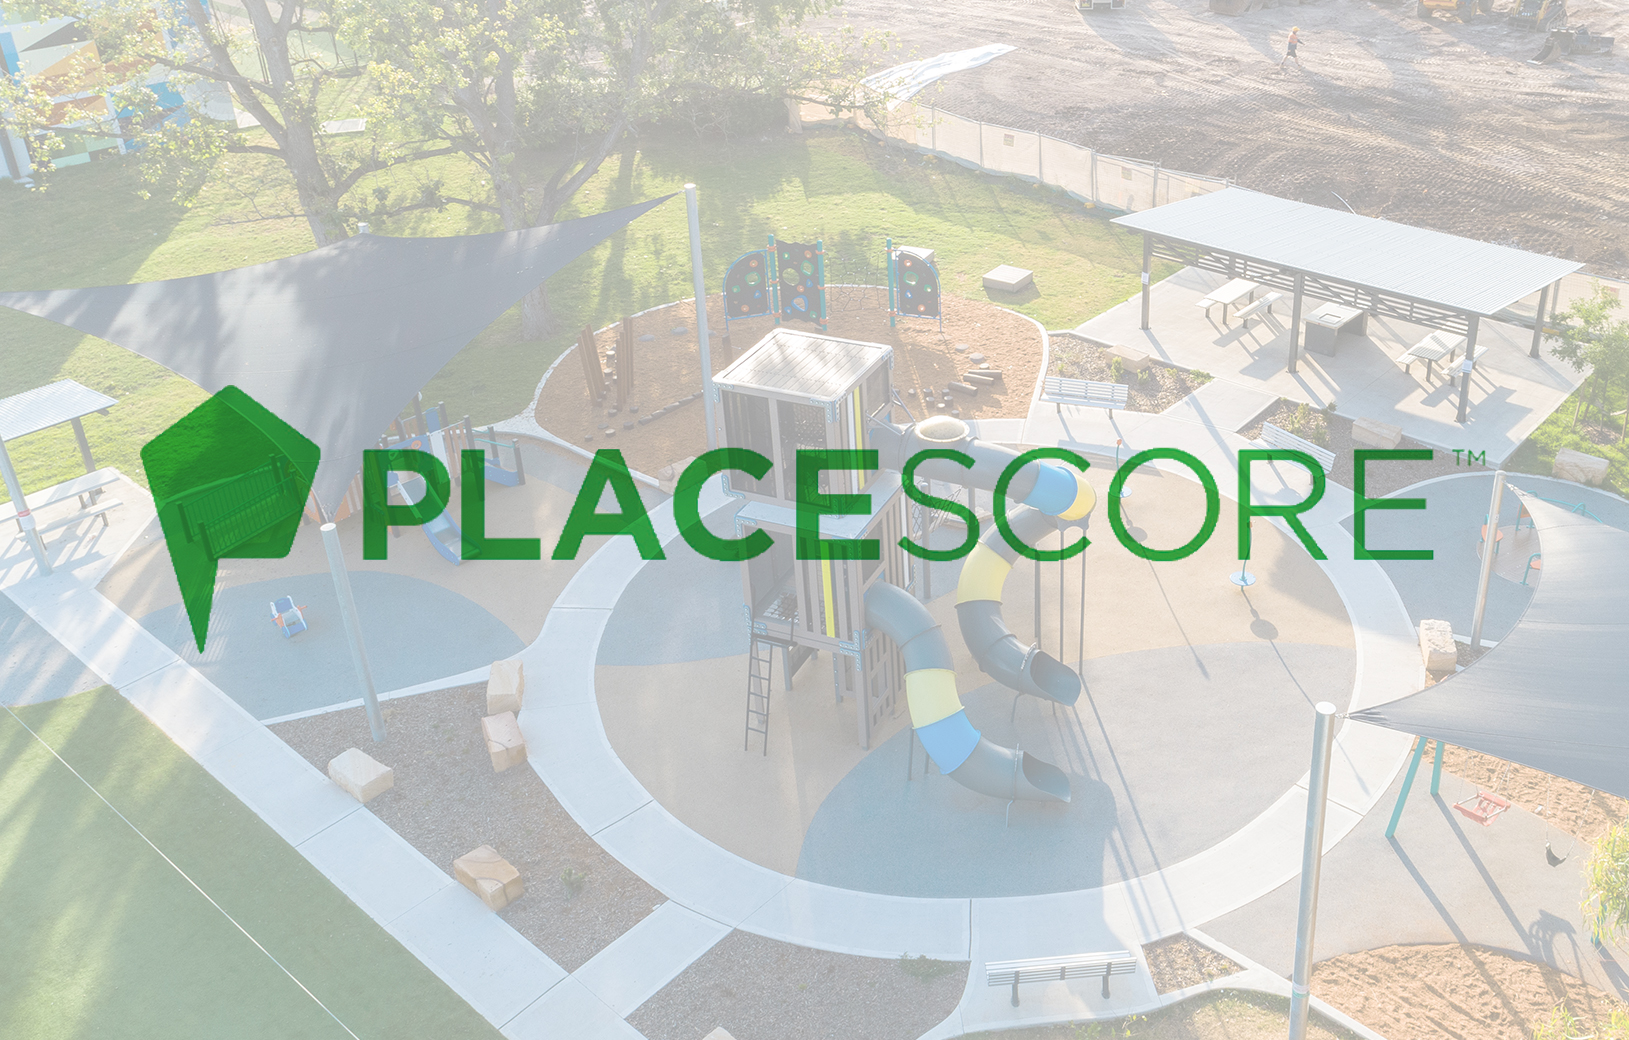 Grillex Partners with Place Score for Innovative Research Project in Parks and Places Industry